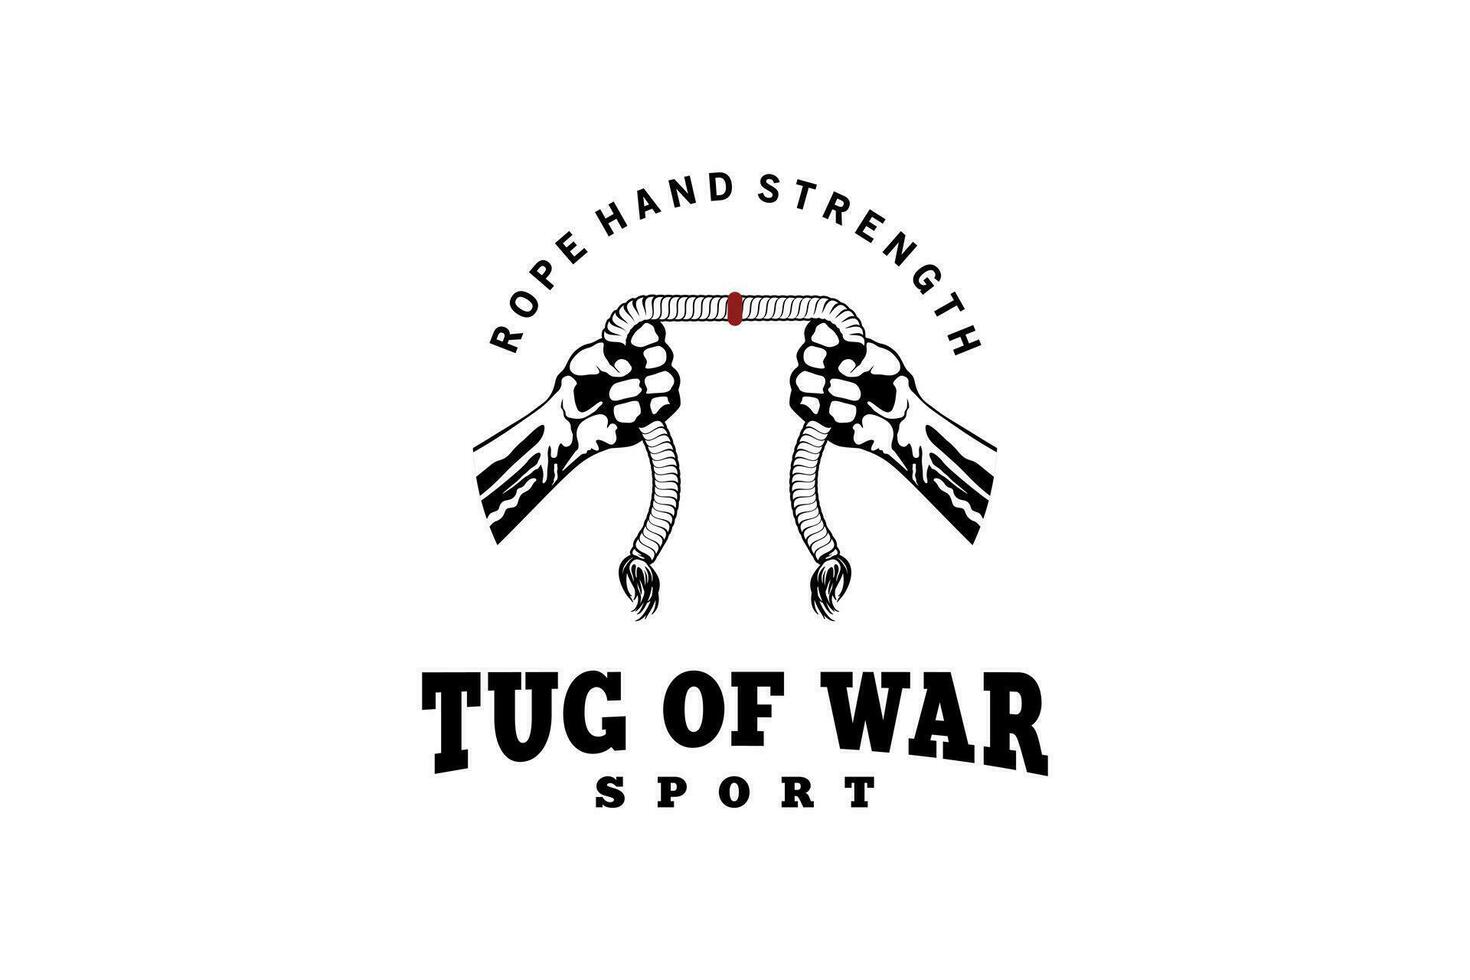 Design of two muscular arms fighting each other with a rope for tug of war sport logo vector